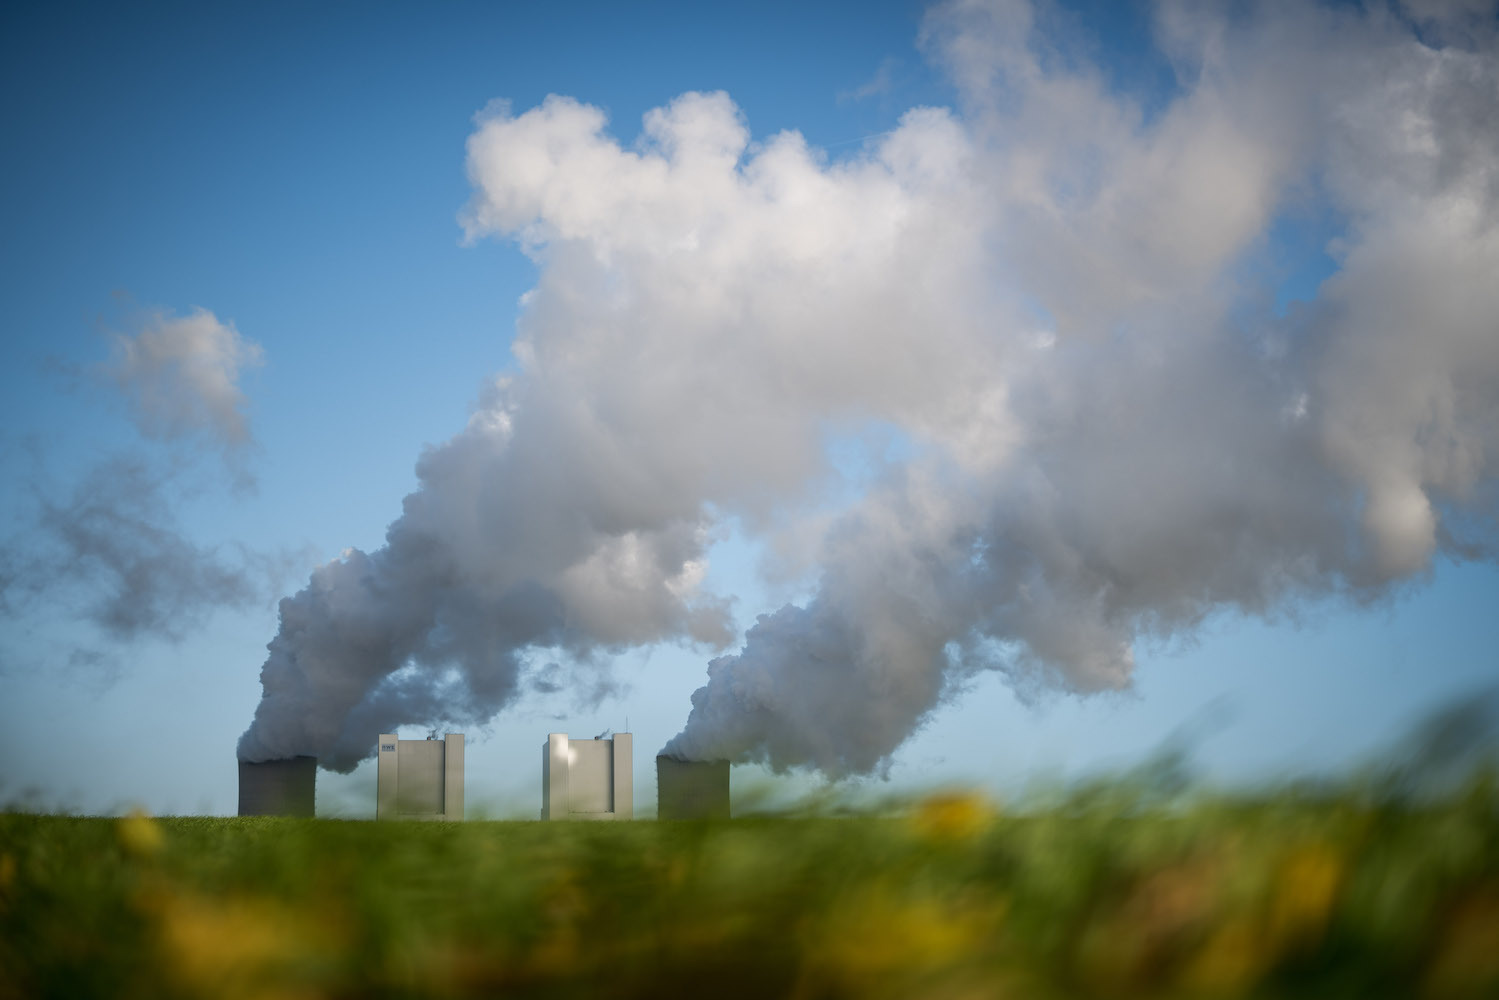 Is Your General Knowledge as Good as You Think It Is? Air pollution power plant